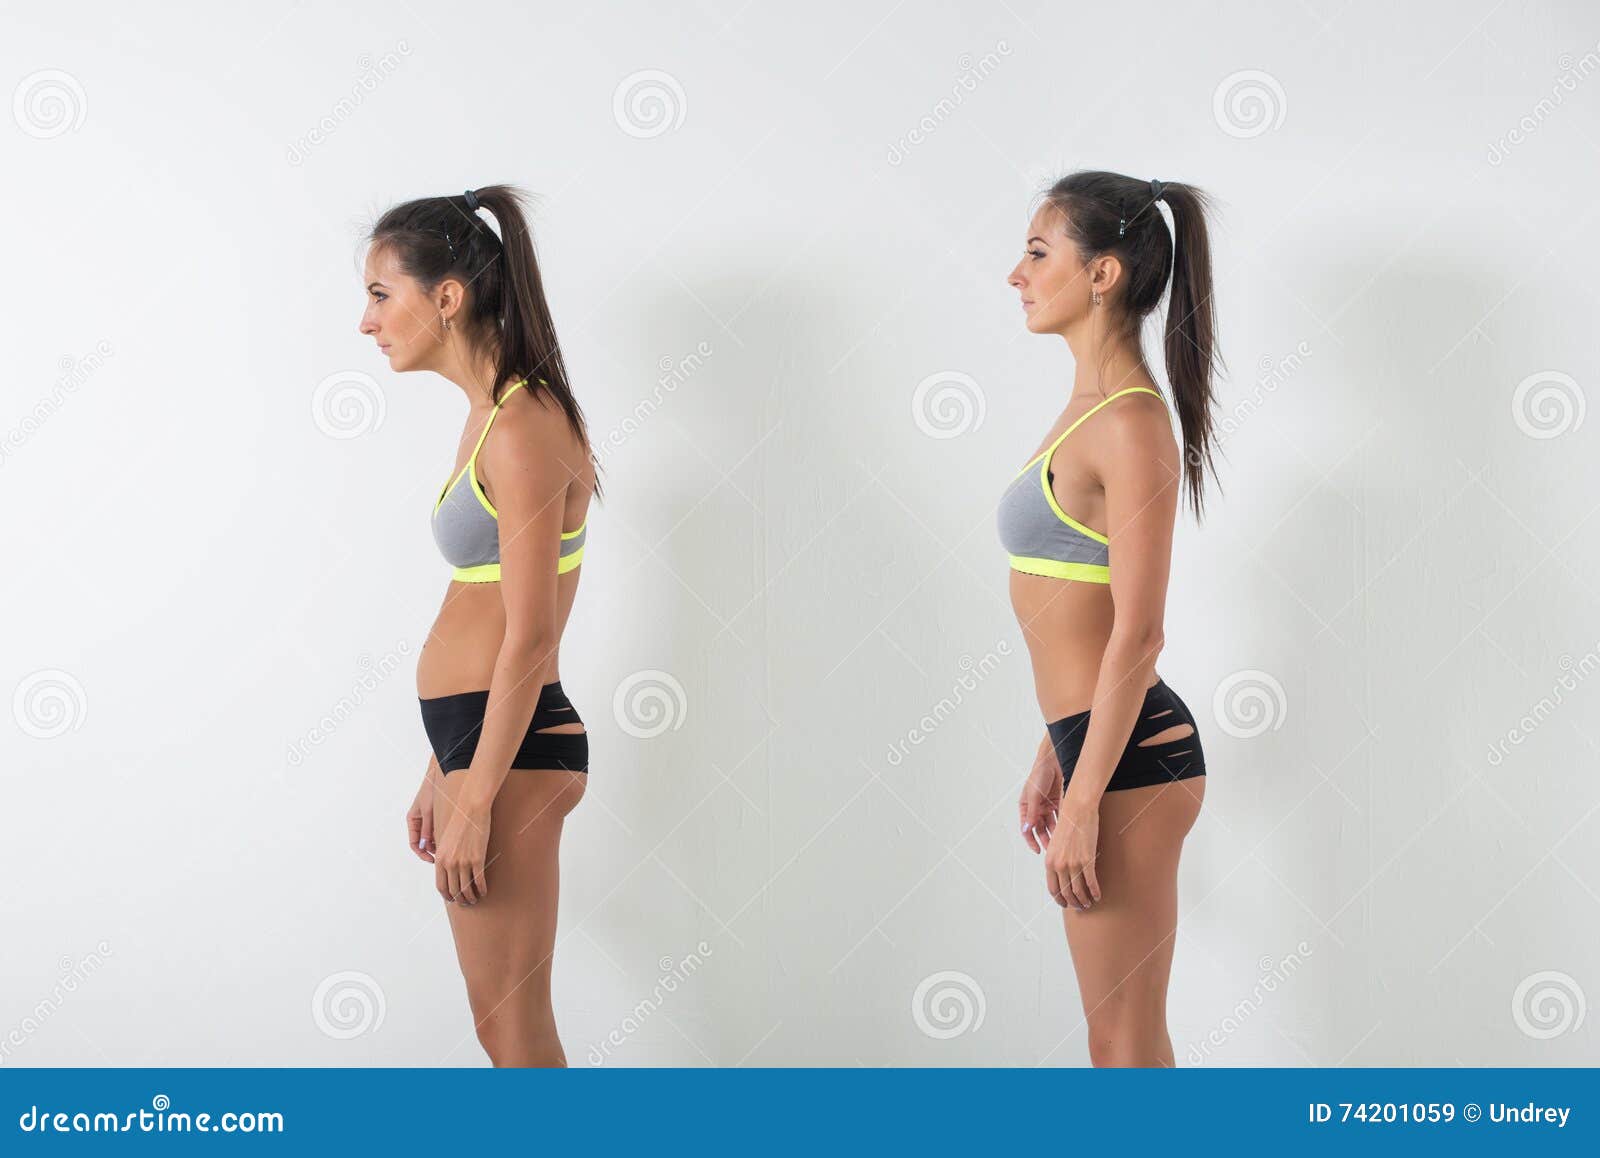 woman with impaired posture position defect scoliosis and ideal bearing